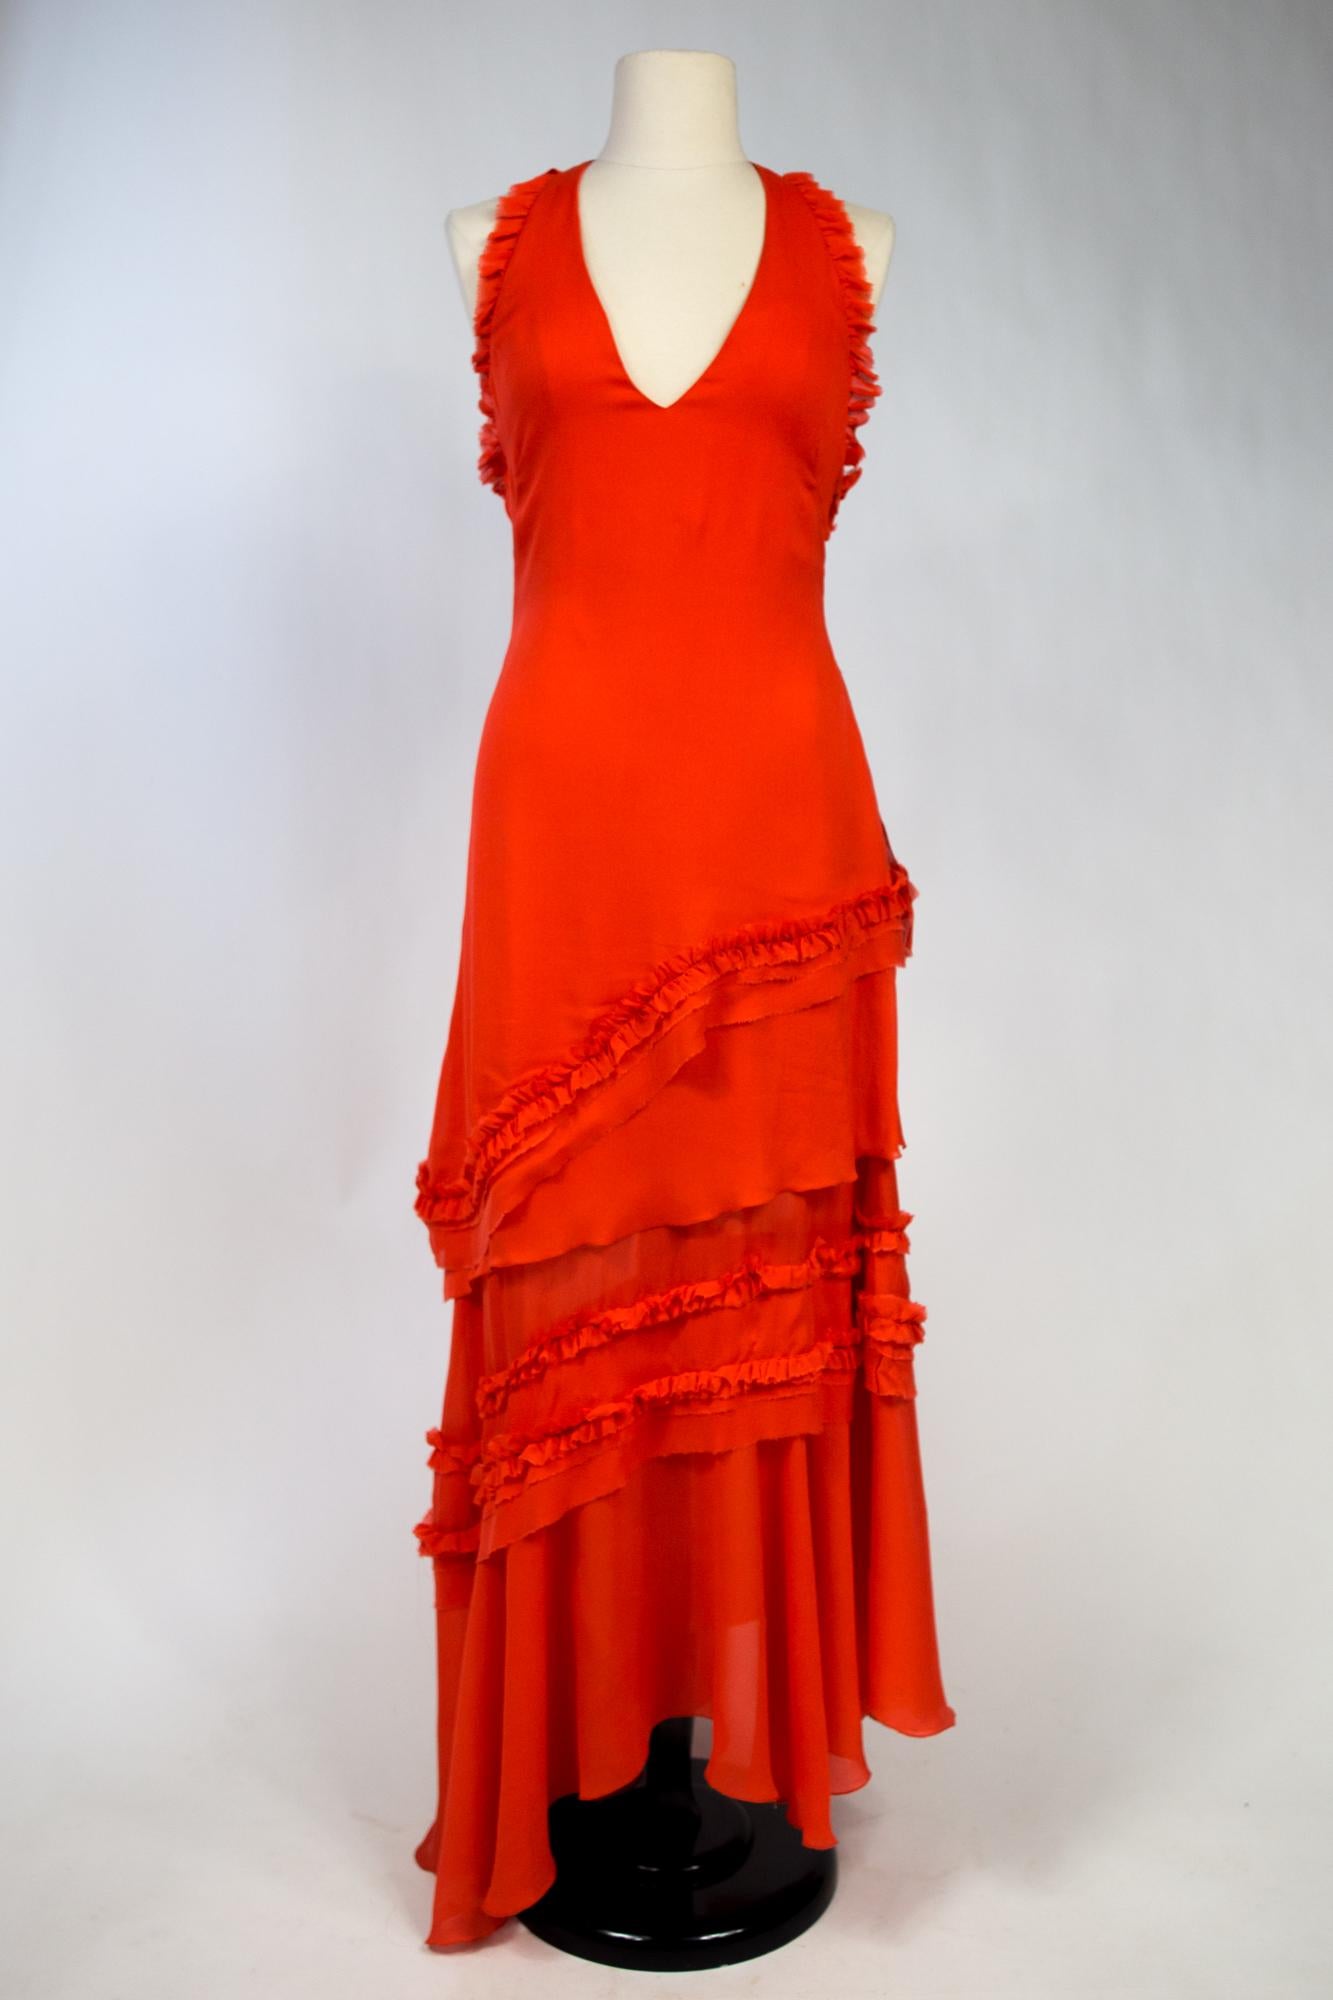 Red A Thierry Mugler Couture Evening Dress in Coral Silk Crepe Circa 1997/2002 For Sale